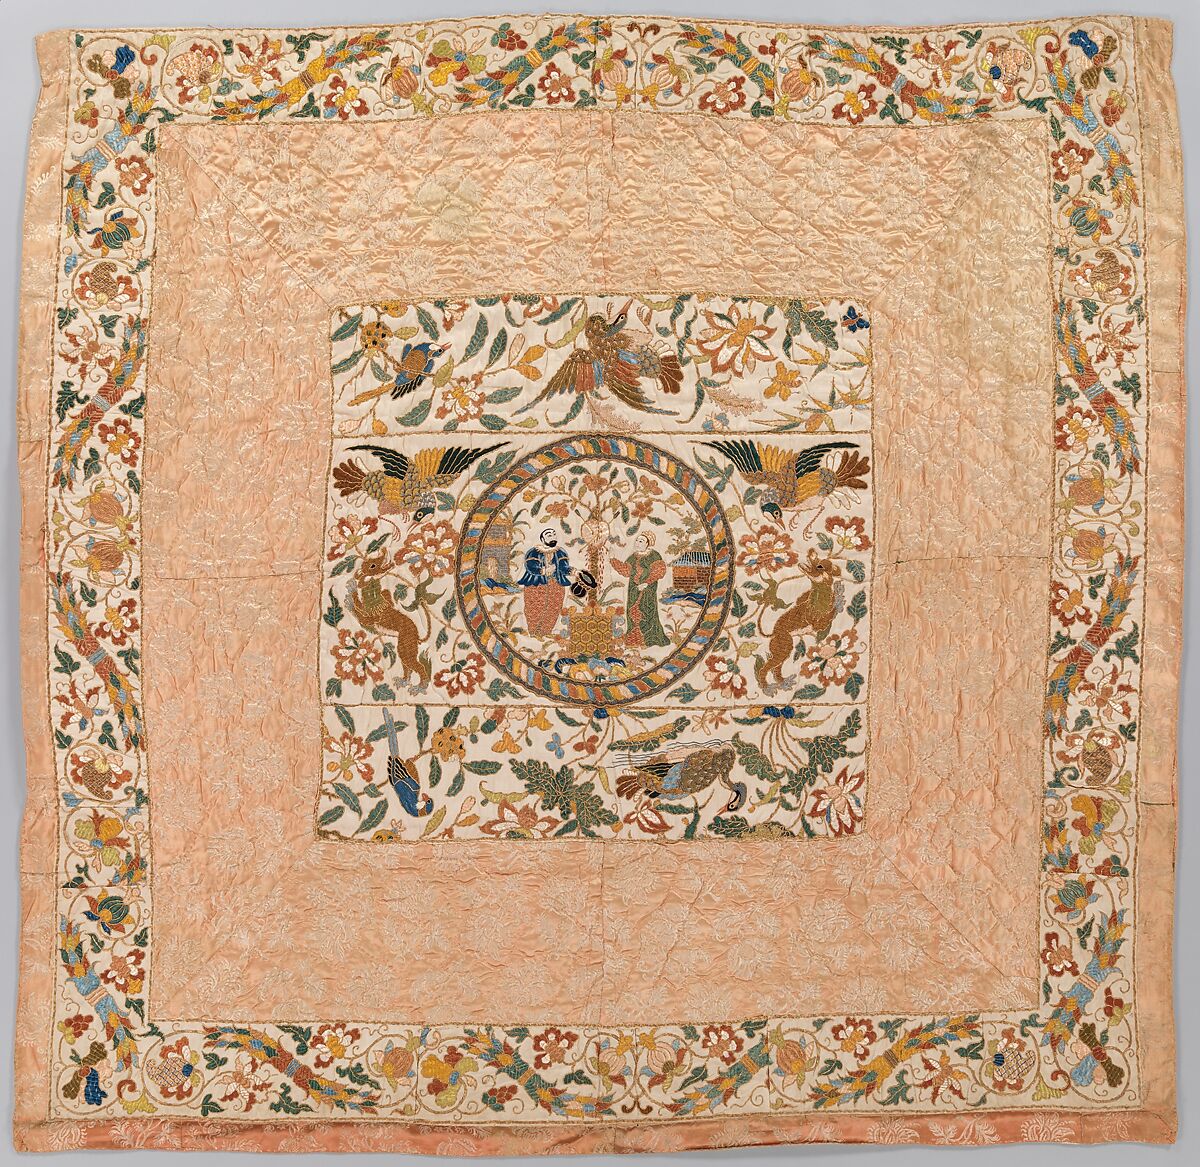 Quilt, Central panel and outer border: silk, embroidered with silk and gilt-paper-wrapped thread; inner border: silk damask, Chinese, for European market, and European 